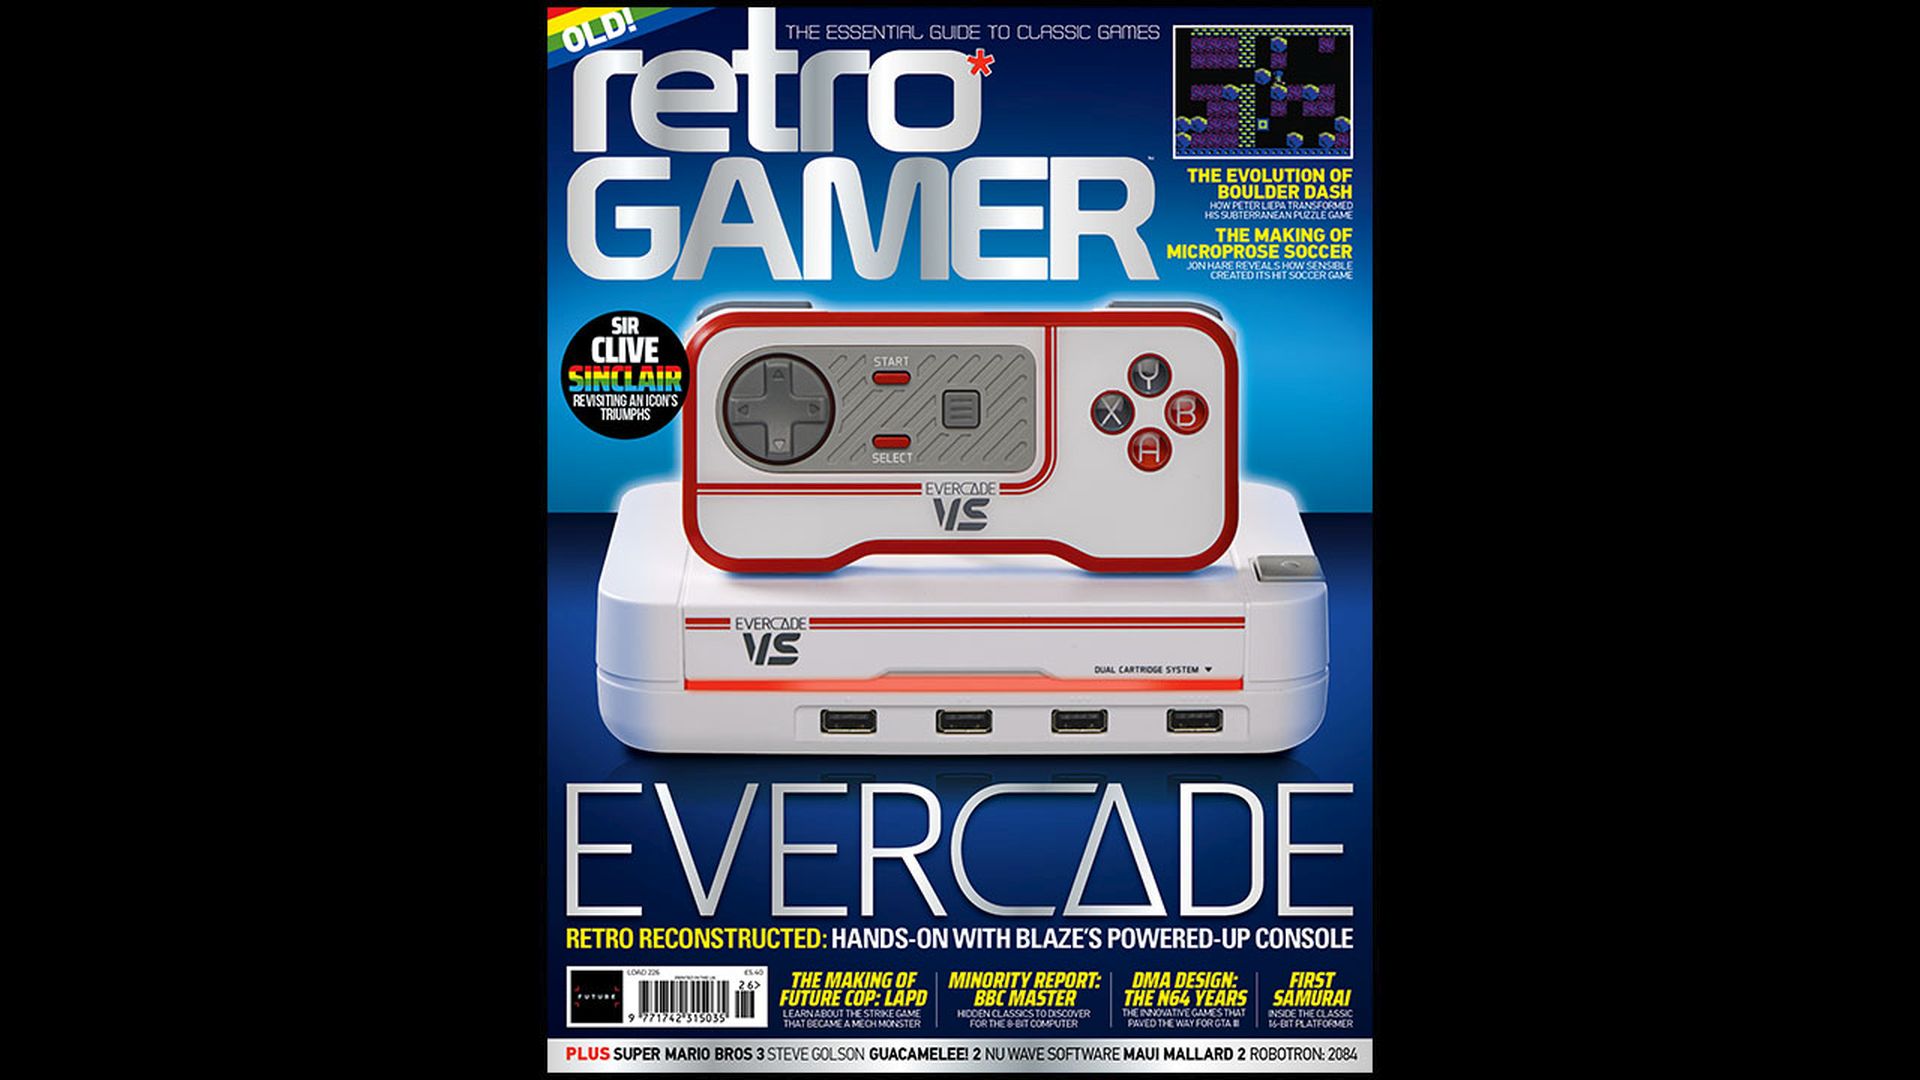 The new Retro Gamer goes hands-on with the Evercade VS console